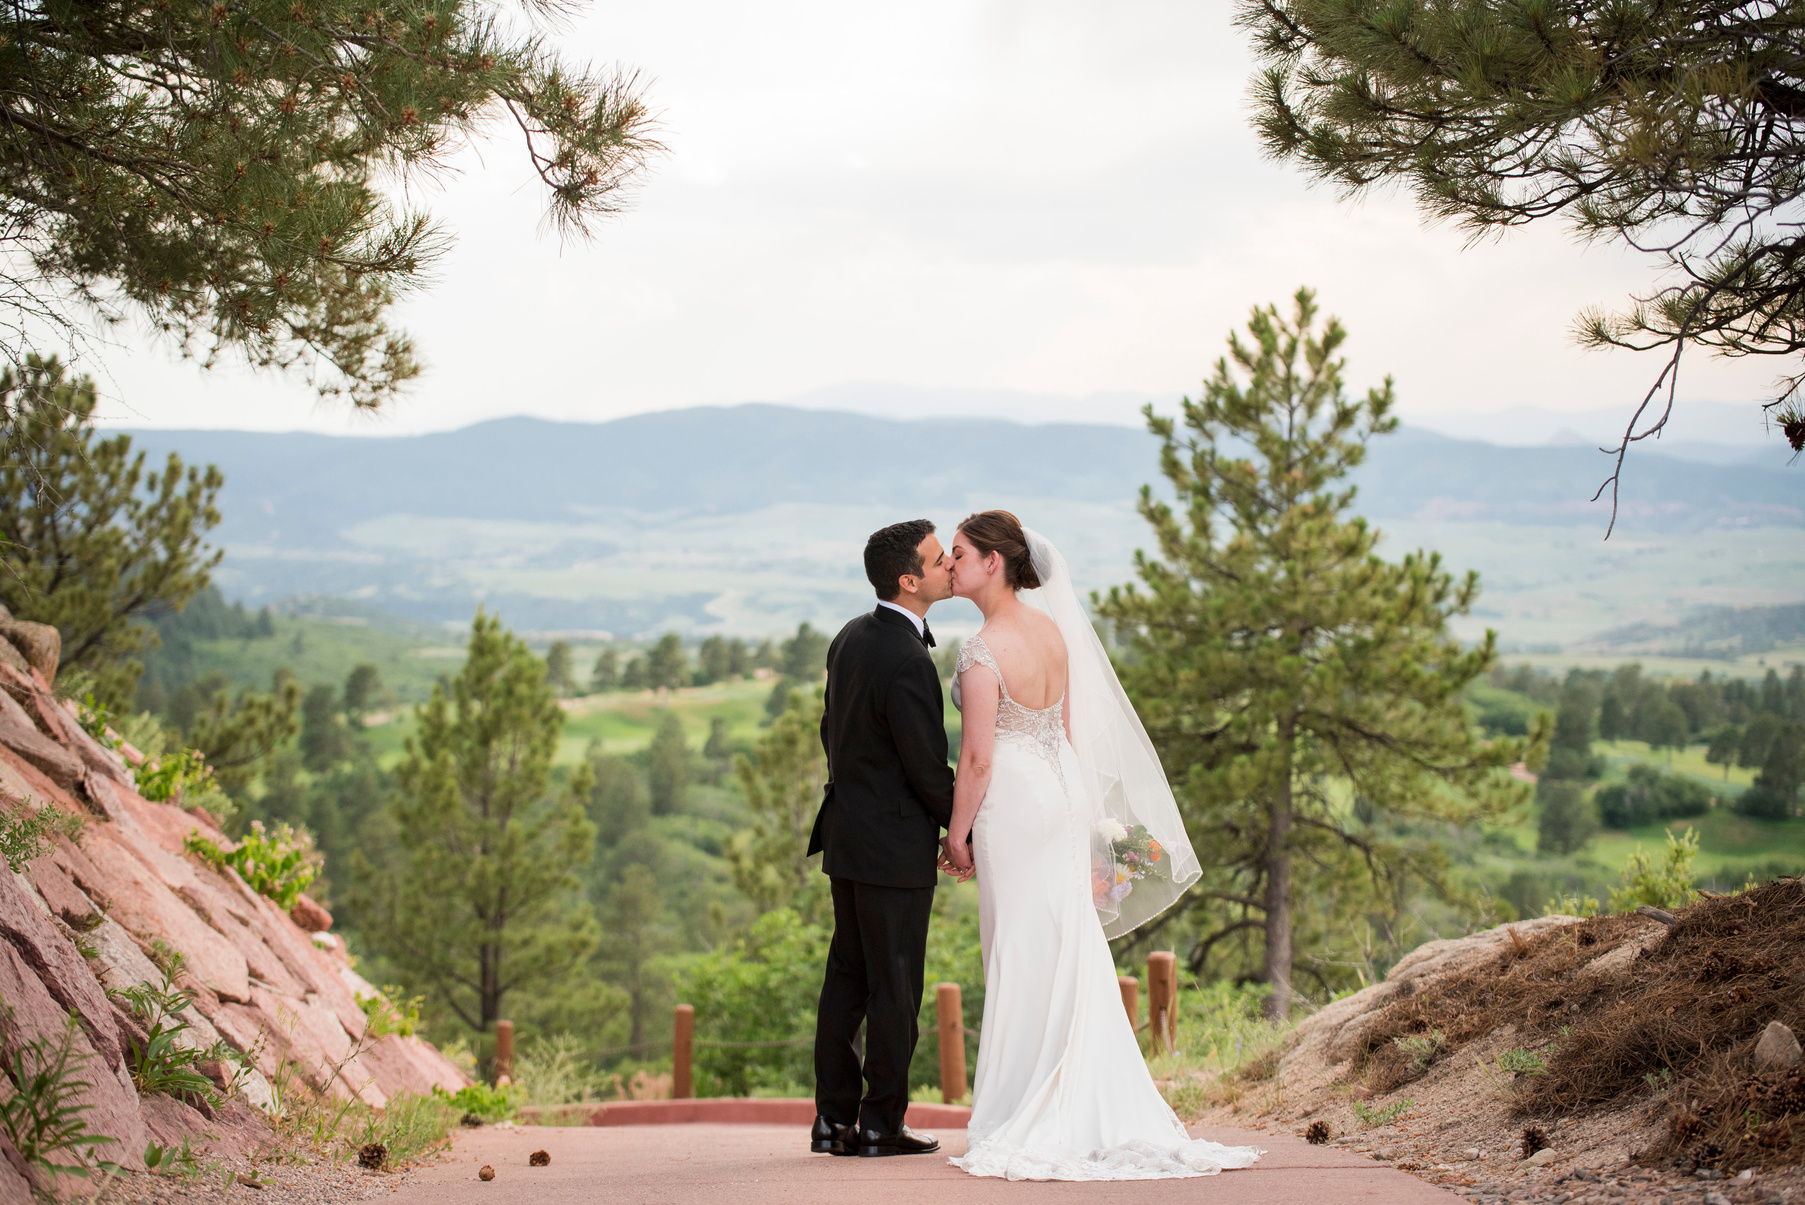 A bride and groom share a kiss while walking along a path with Colorado mountains in the background.